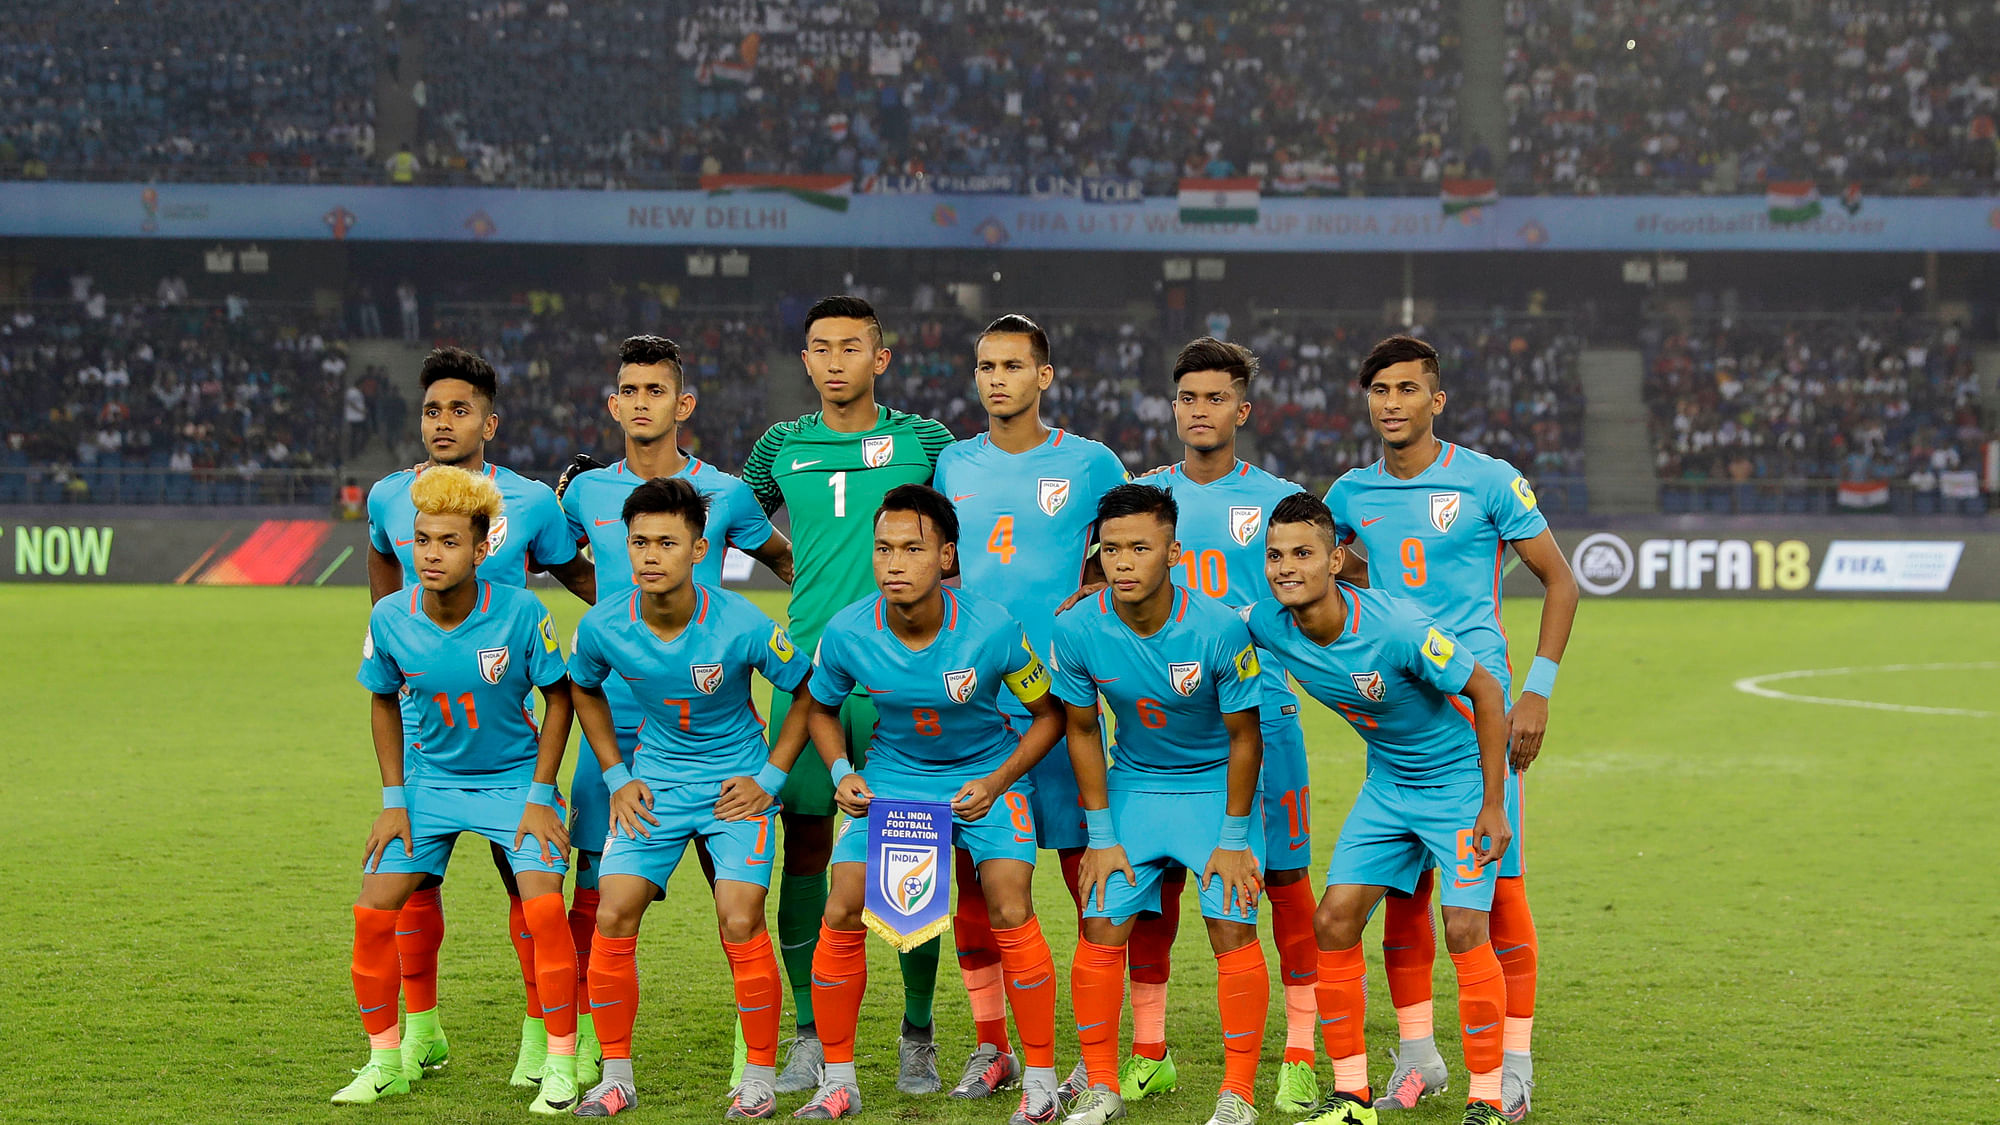 The Indian team pose for a team photo before the start of their Under-17 World Cup match against USA in New Delhi.